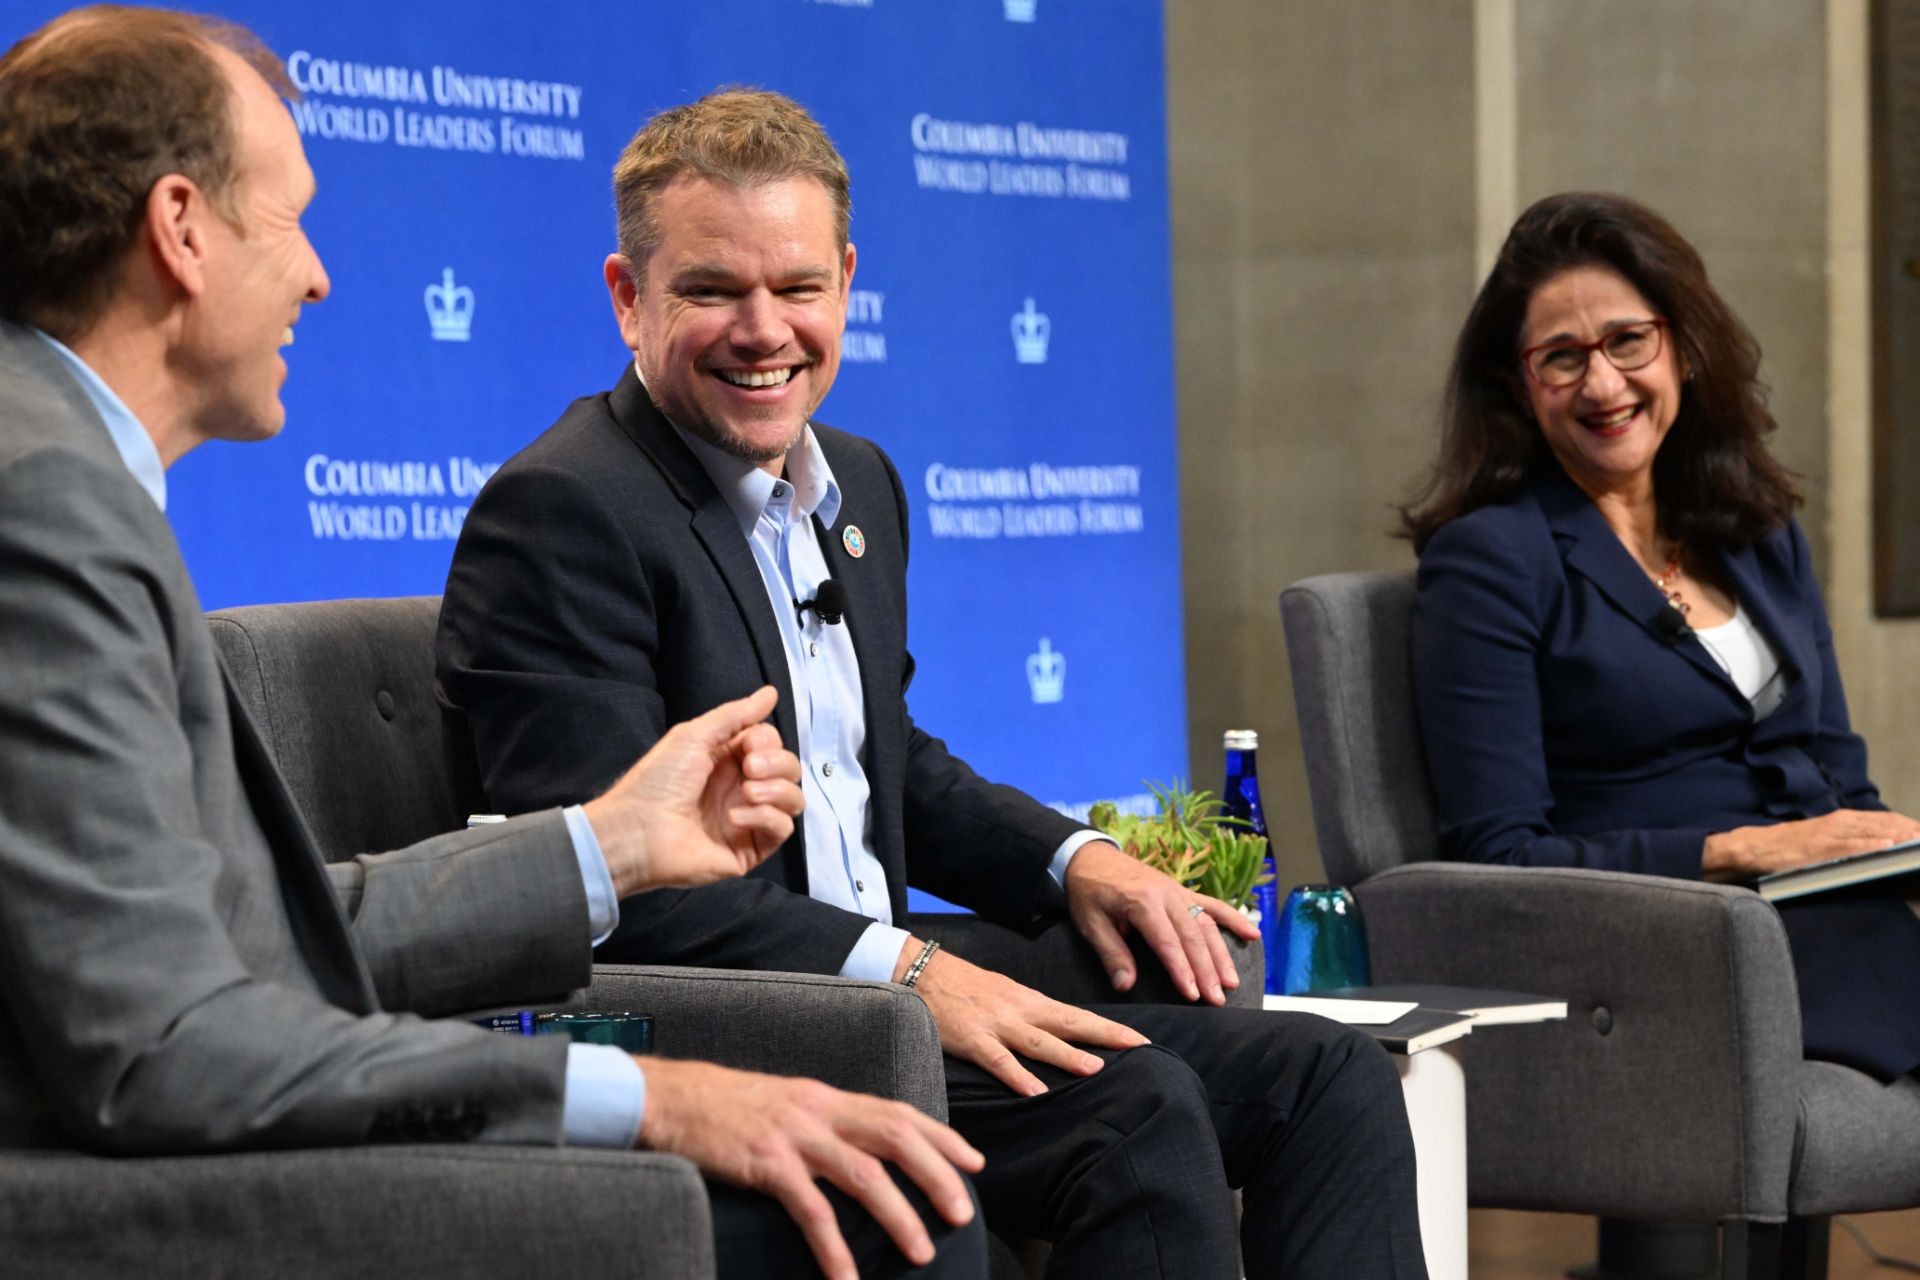 Co-Founders of Water.Org and WaterEquity Gary White (left), Matt Damon (middle), and President Minouche Shafik (right) during the World Leaders Forum